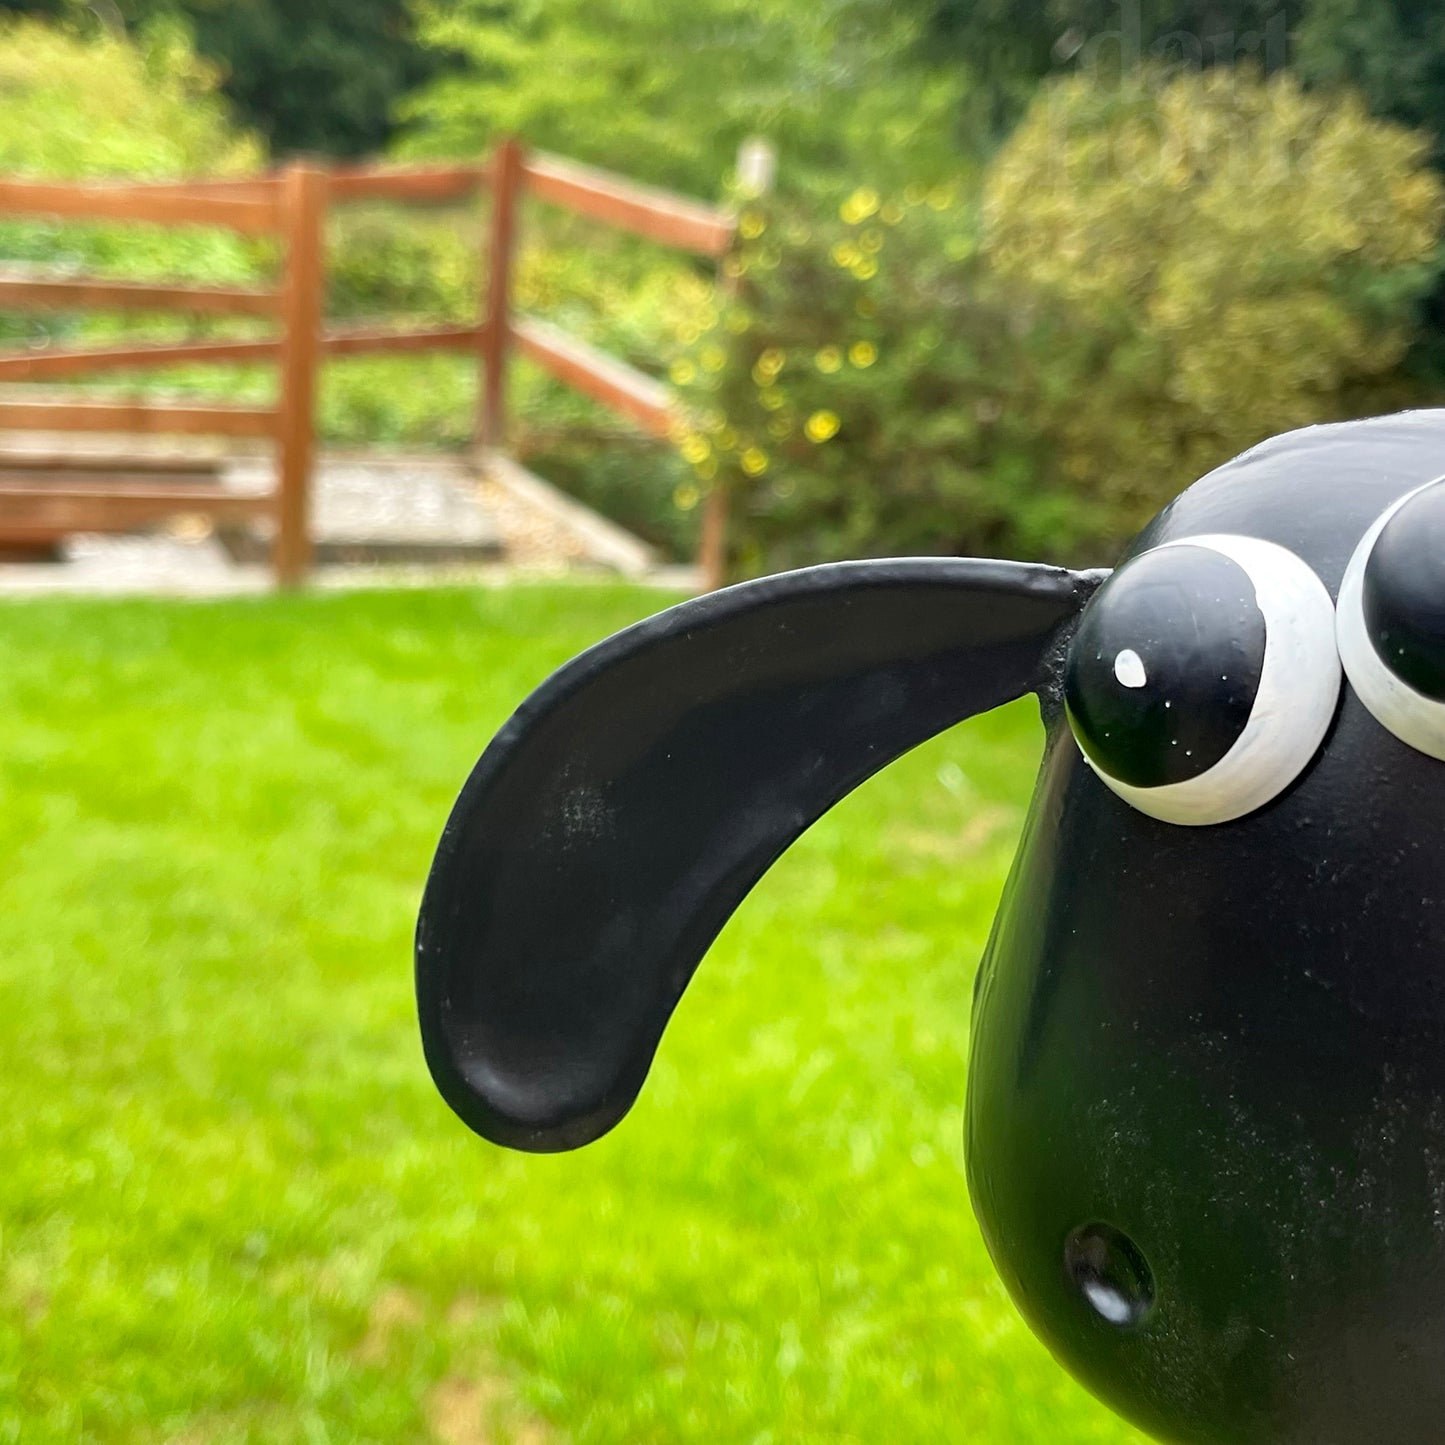 Metal Timmy The Sheep Sculpture